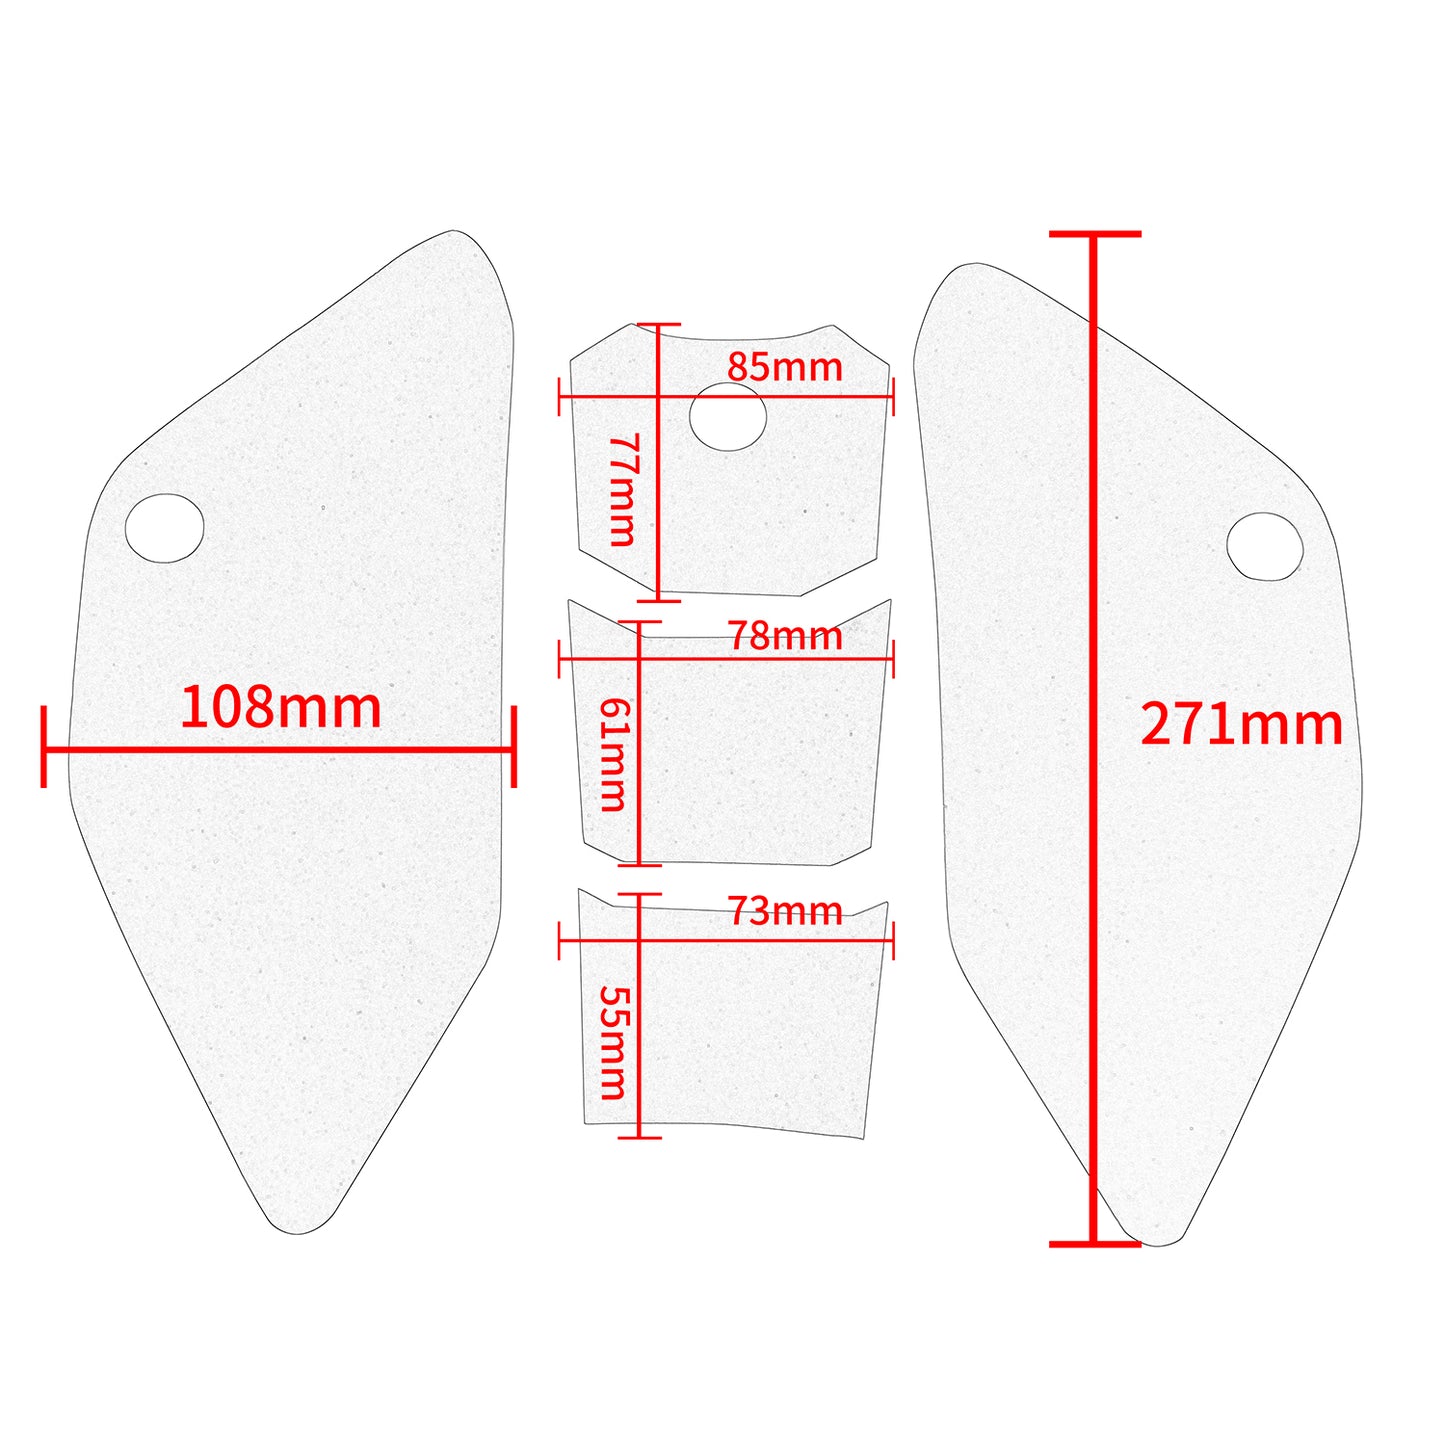 Wolfline Motorcycle Anti Slip Tank Pad Stickers Side Gas Tank Pad Knee Grip Decals Protection For Honda CB190TR CB190 TR CB 190TR